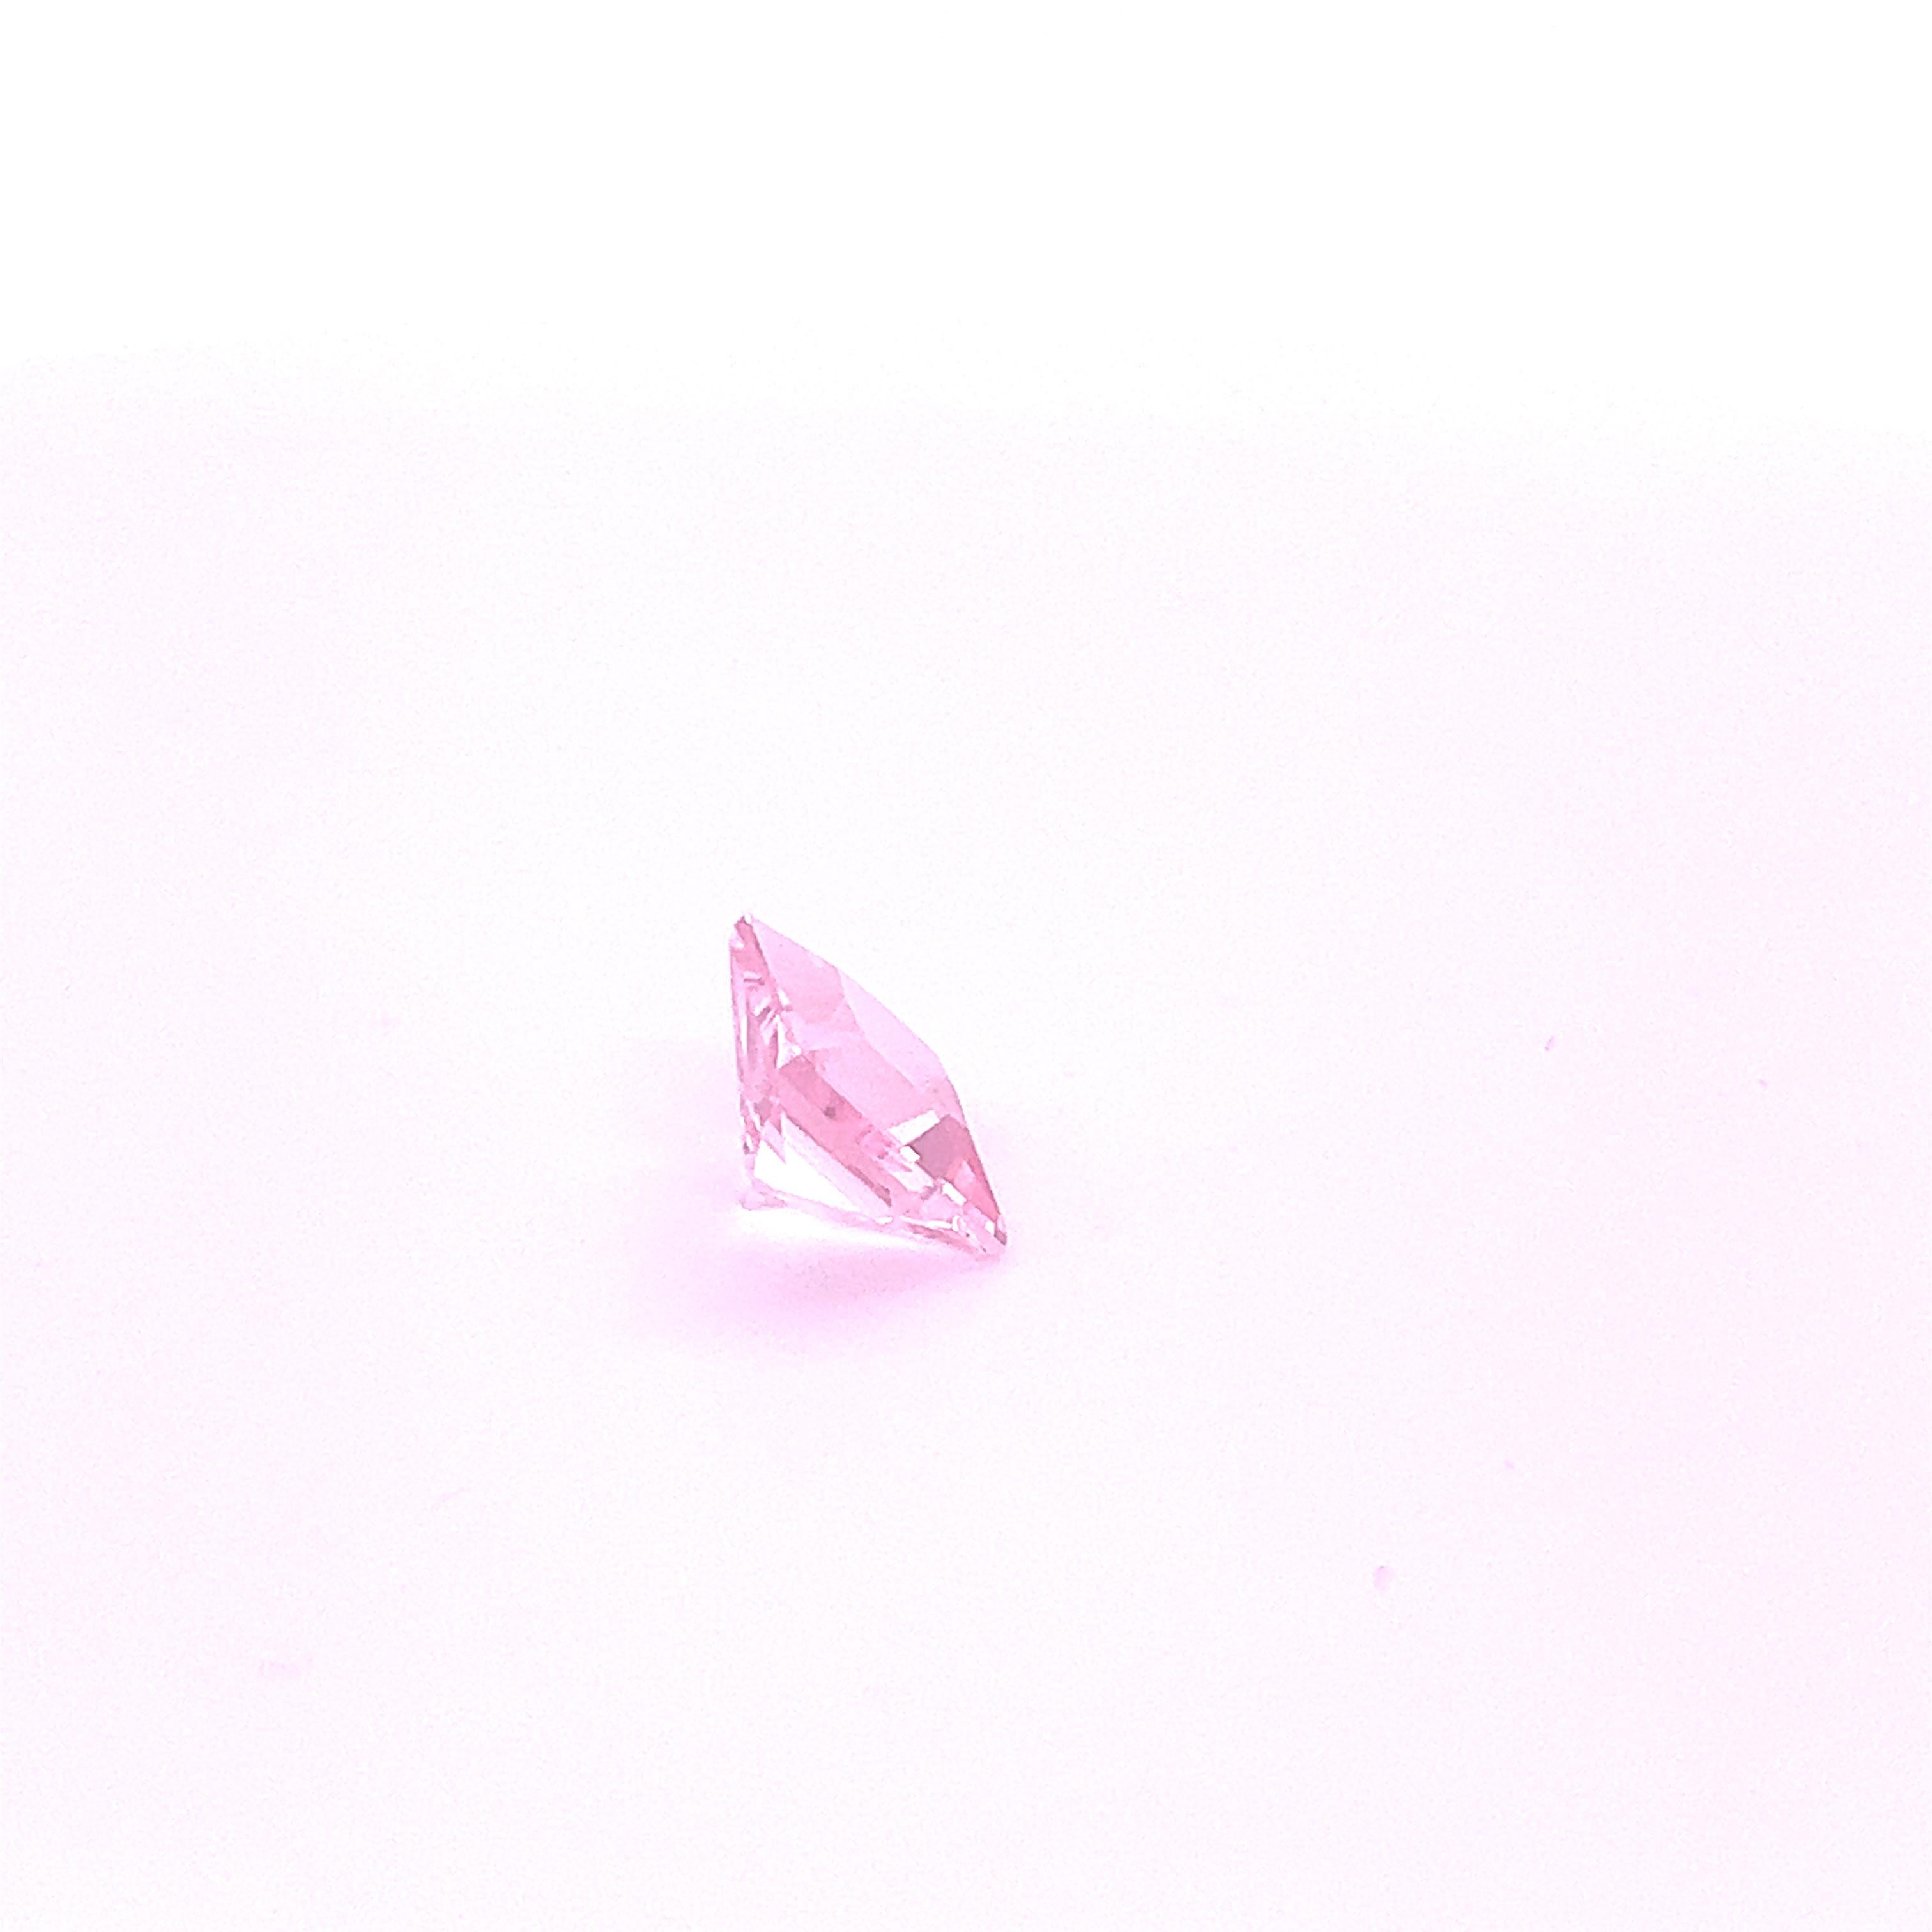 SKU - 50015
Stone : Natural Pink Morganite
Shape : Octagon
Clarity -  Eye clean
Grade -  AAA
Weight - 1.37 Cts
Length * Width * Height - 8.8*8.8*5.8
Price - $ 500

Morganite is a gemstone that brings the prism of love in all its incarnations.